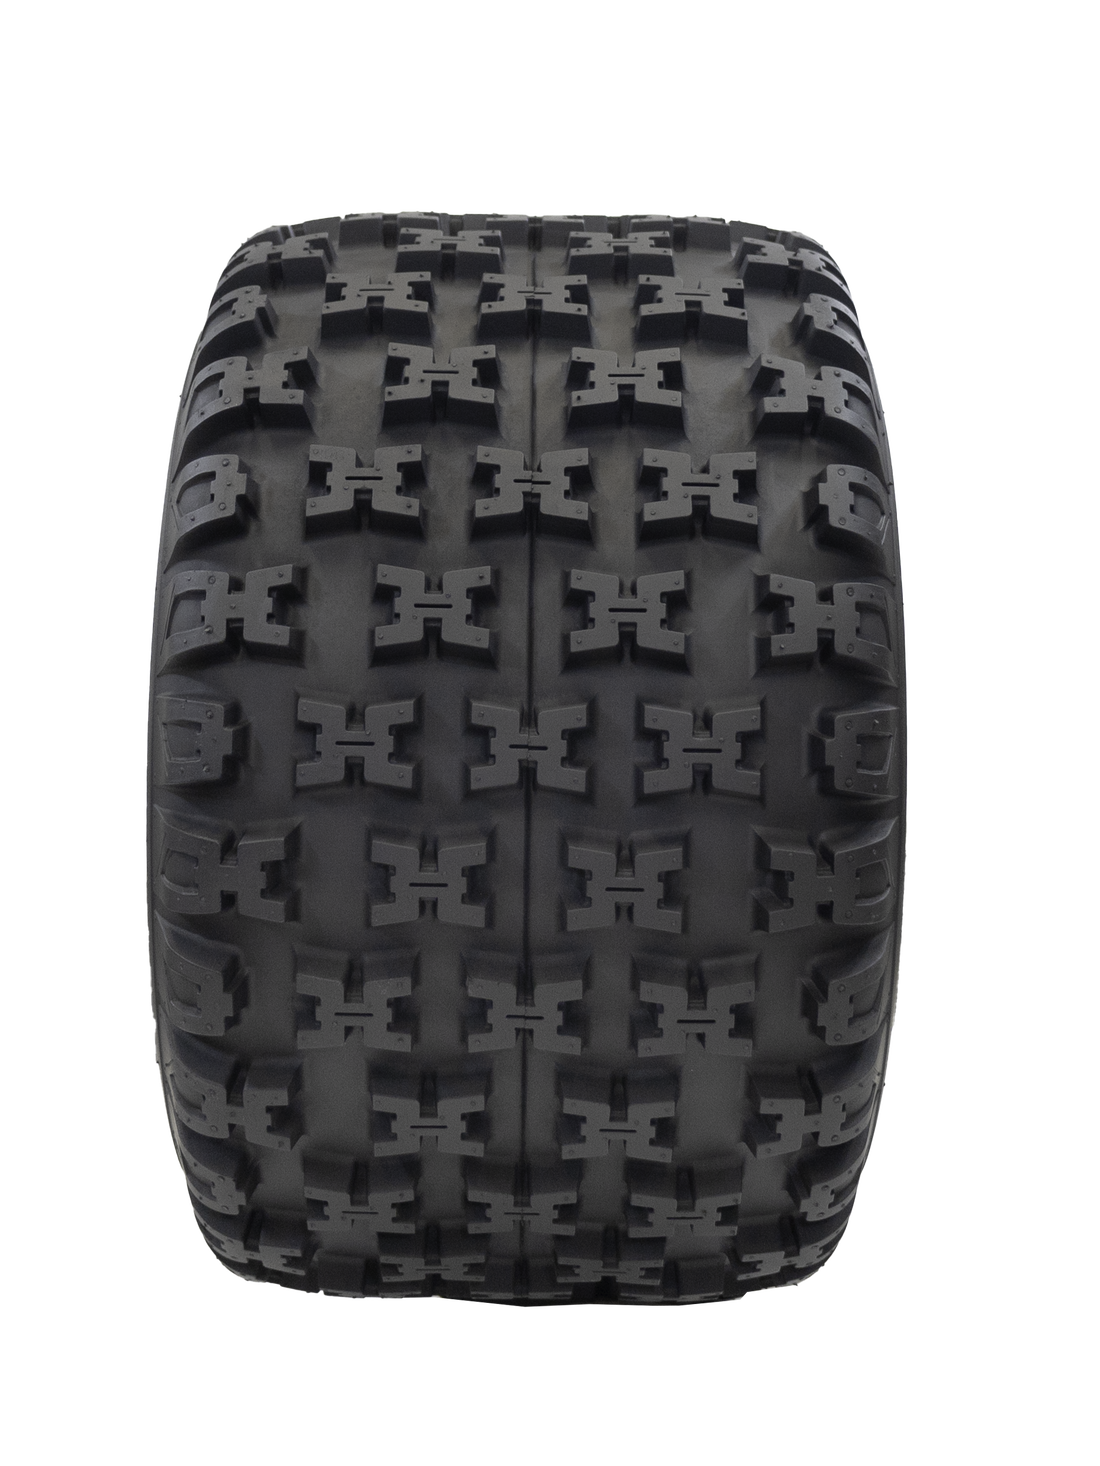 Full frontal view of Mini Master ATV/UTV tire, displaying the full-coverage X-type lug tread pattern. The image accentuates the tire's flat profile, designed for optimal surface contact and improved stability during rides.